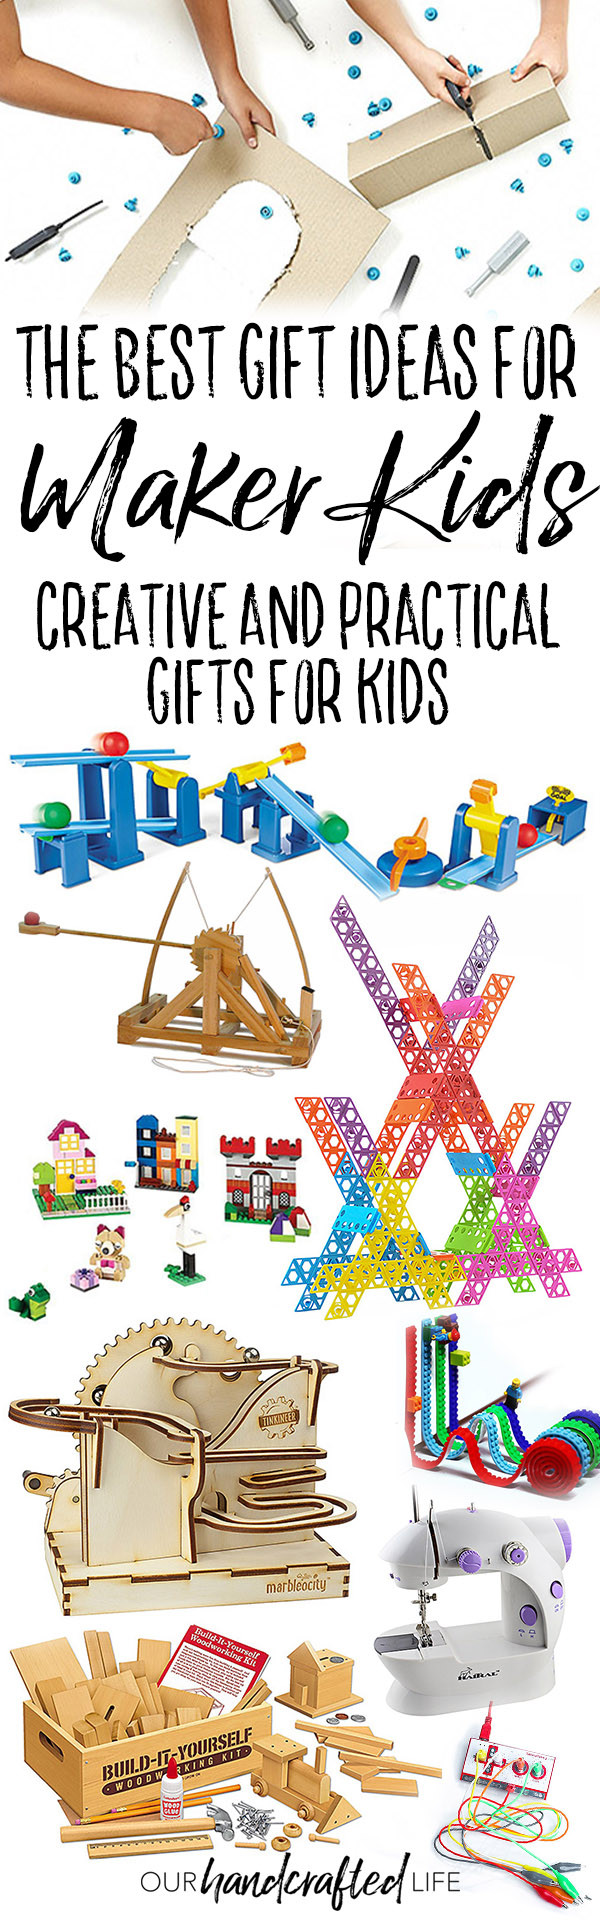 Practical Gifts For Kids
 The Best Gift Ideas for Maker Kids Creative Toys and